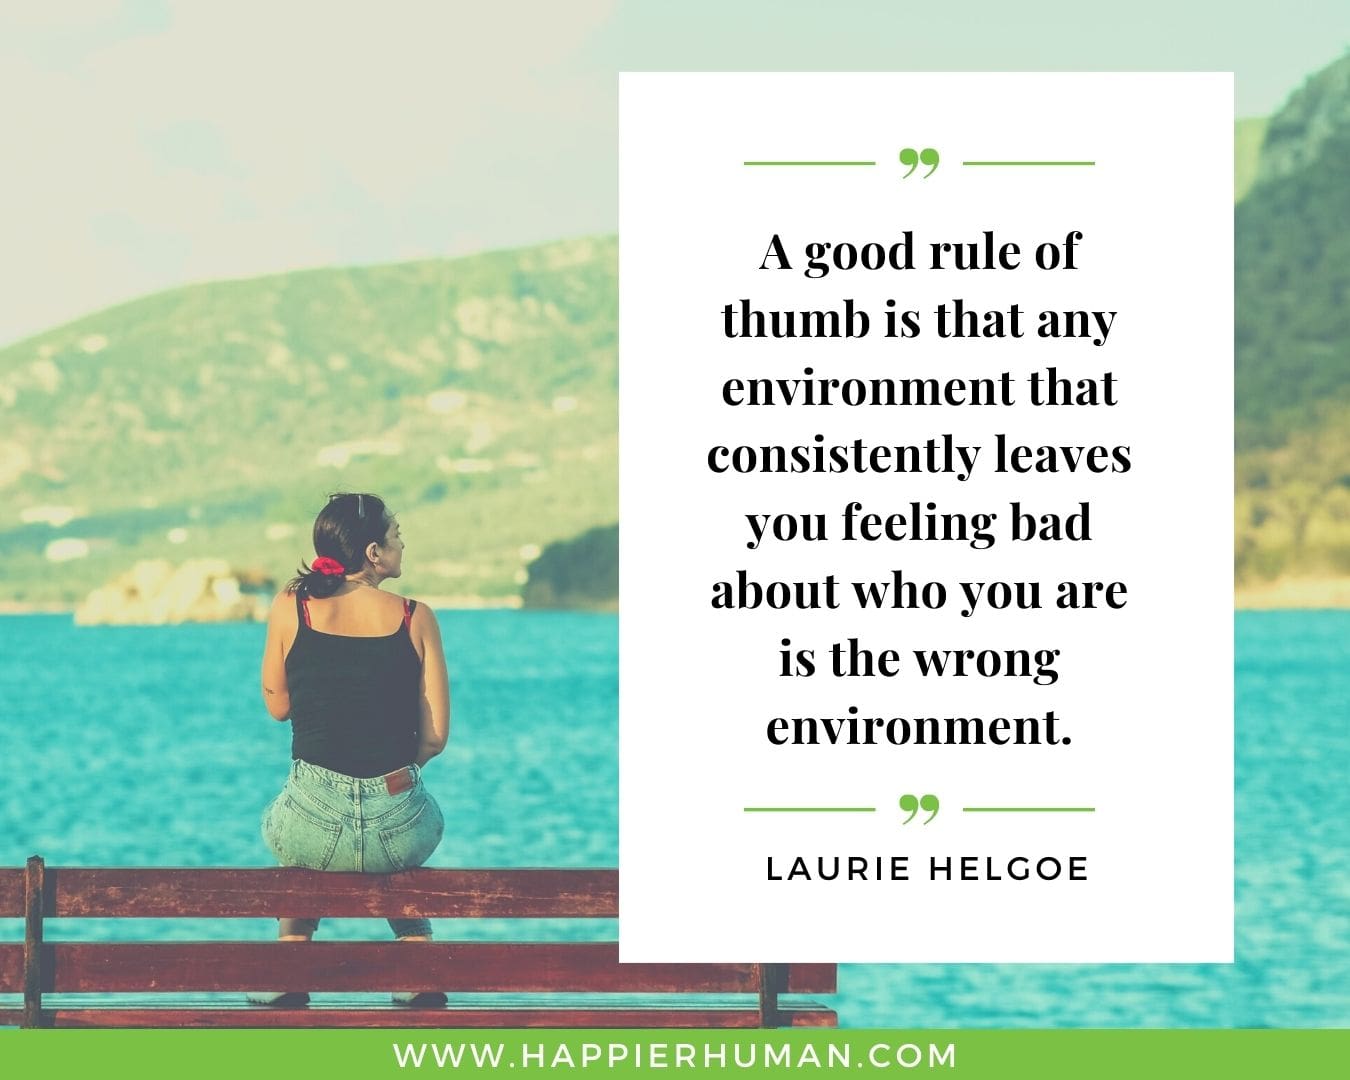 Introvert Quotes - “A good rule of thumb is that any environment that consistently leaves you feeling bad about who you are is the wrong environment.” – Laurie Helgoe